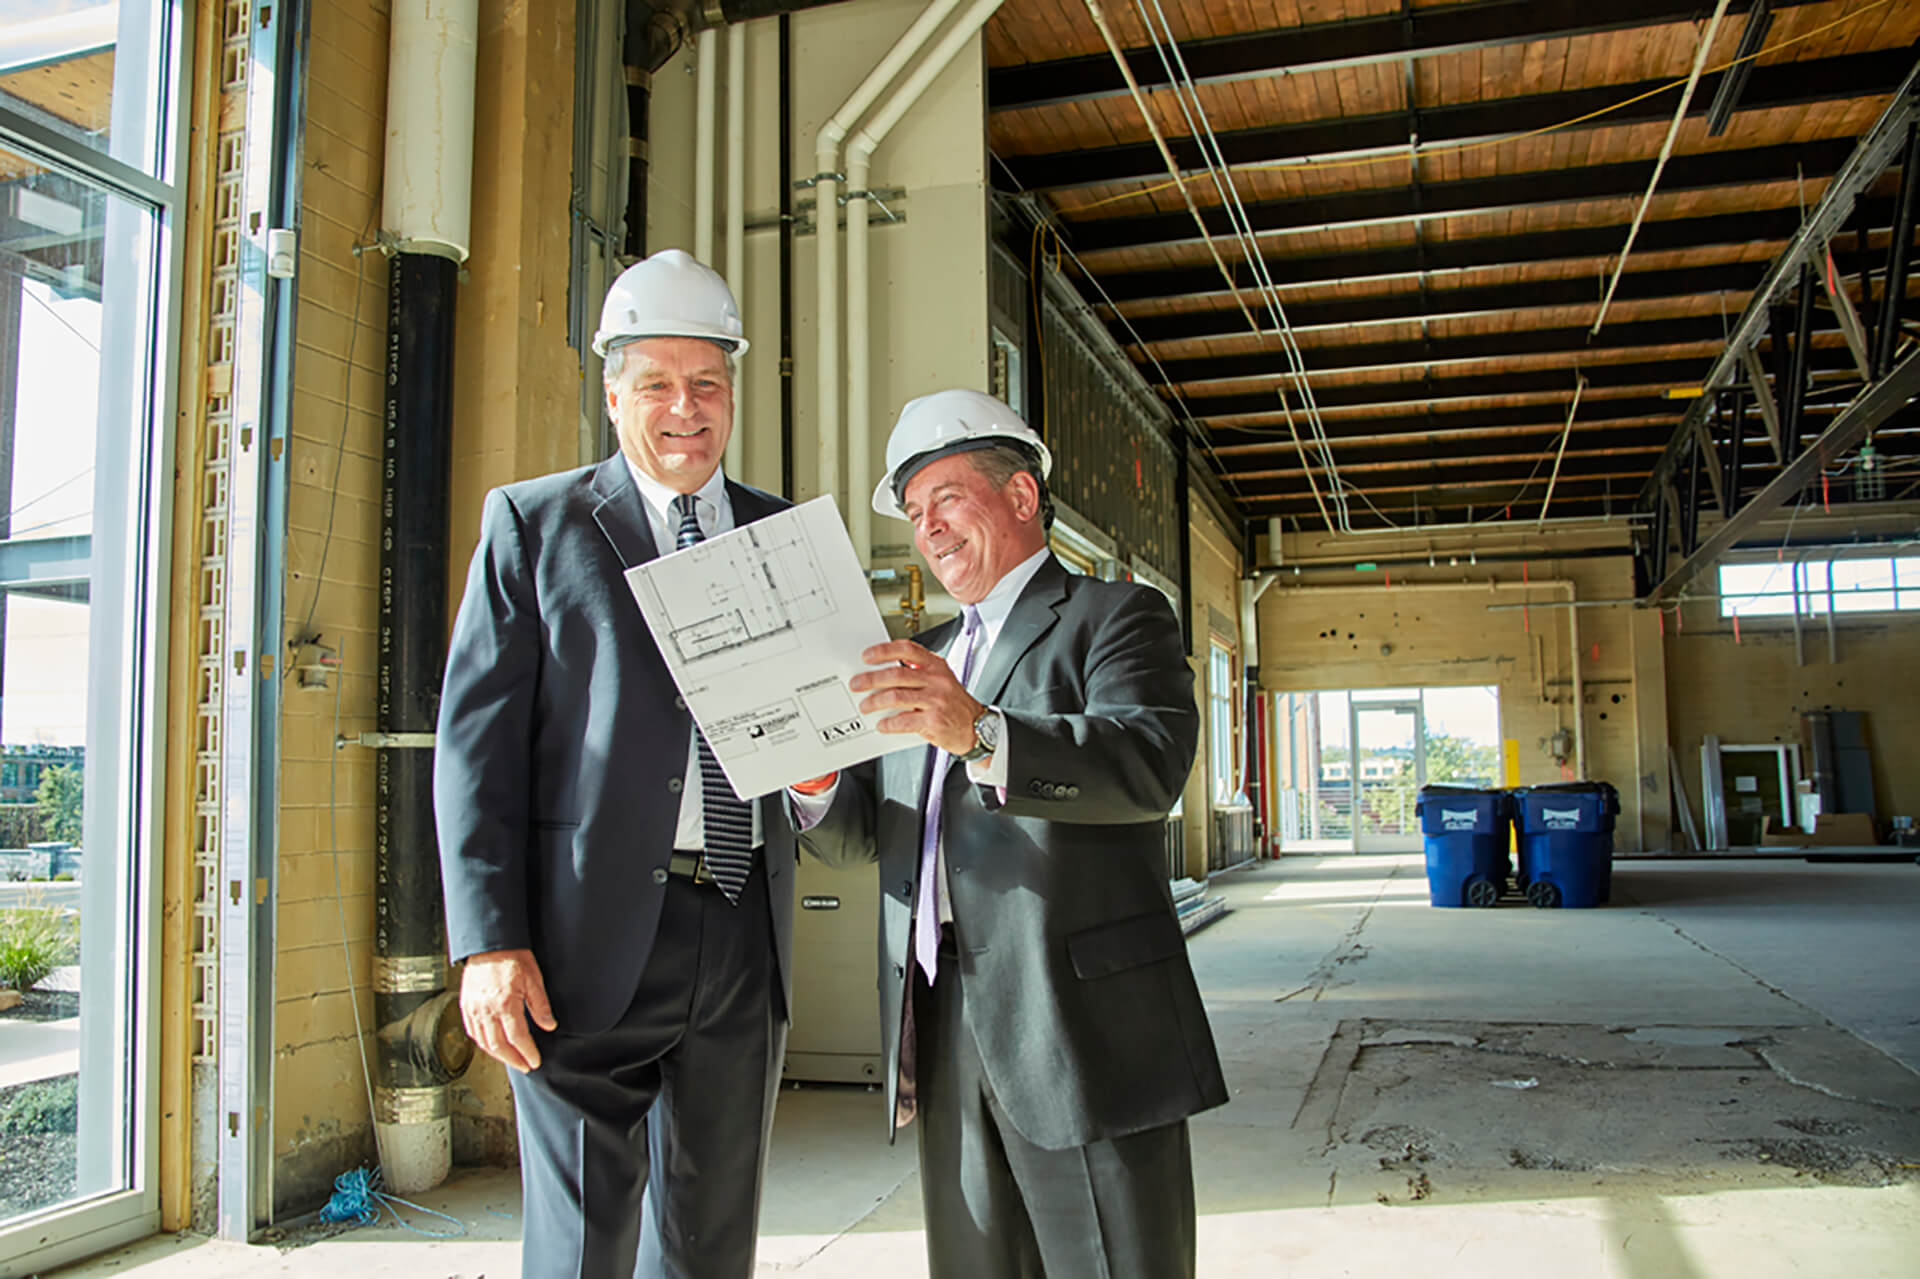 Two Men In Suits And Hardhats